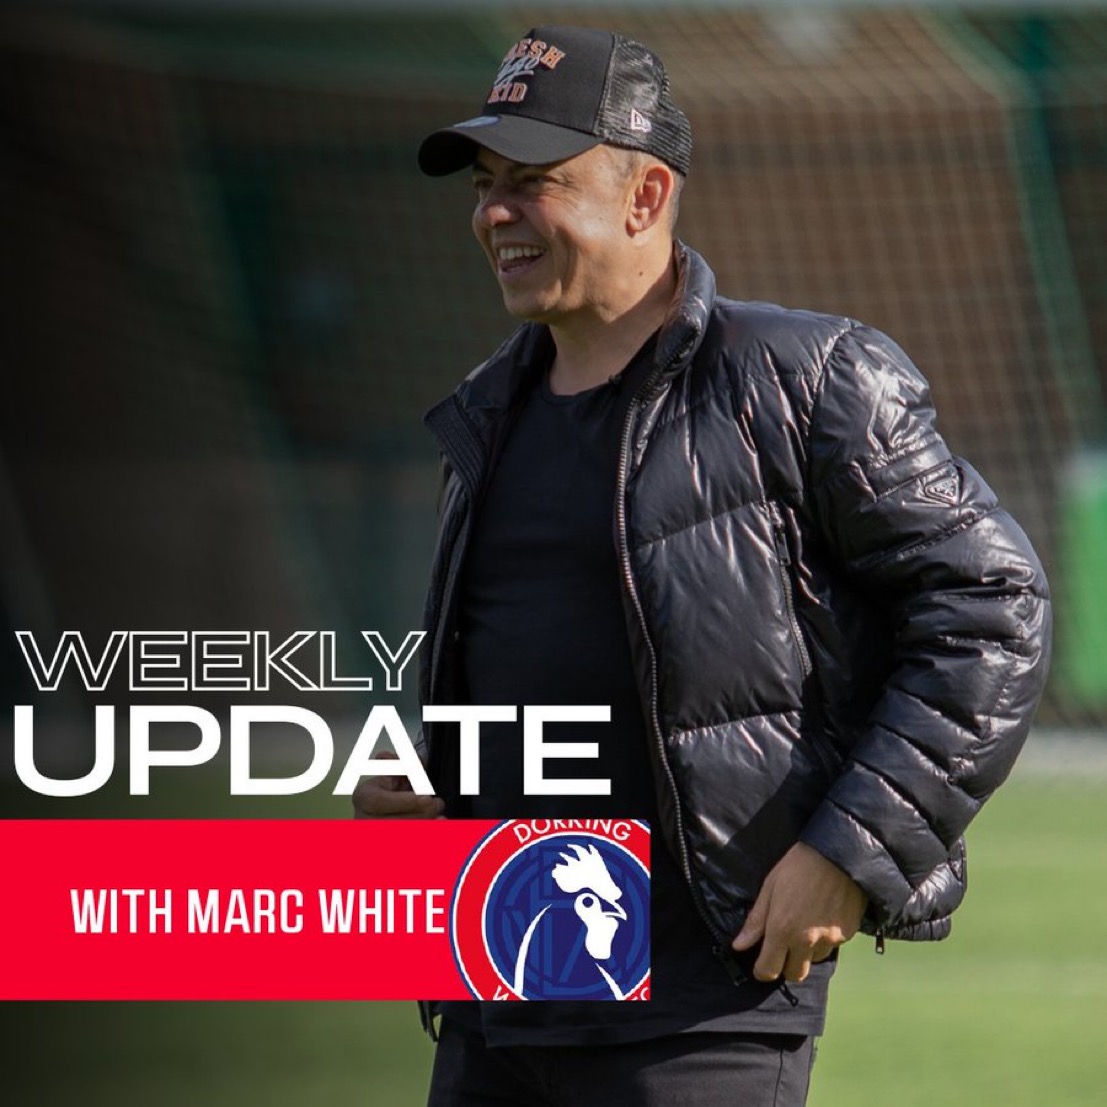 LIVE WEEKLY UPDATE WITH MARC WHITE 🎙️ Tune into the gaffer's weekly update at 12pm tomorrow afternoon. Talking points will include: 🗣️ Wealdstone (a) 🗣️ On the road at Rochdale this Saturday @WealdstoneFC | @officiallydale